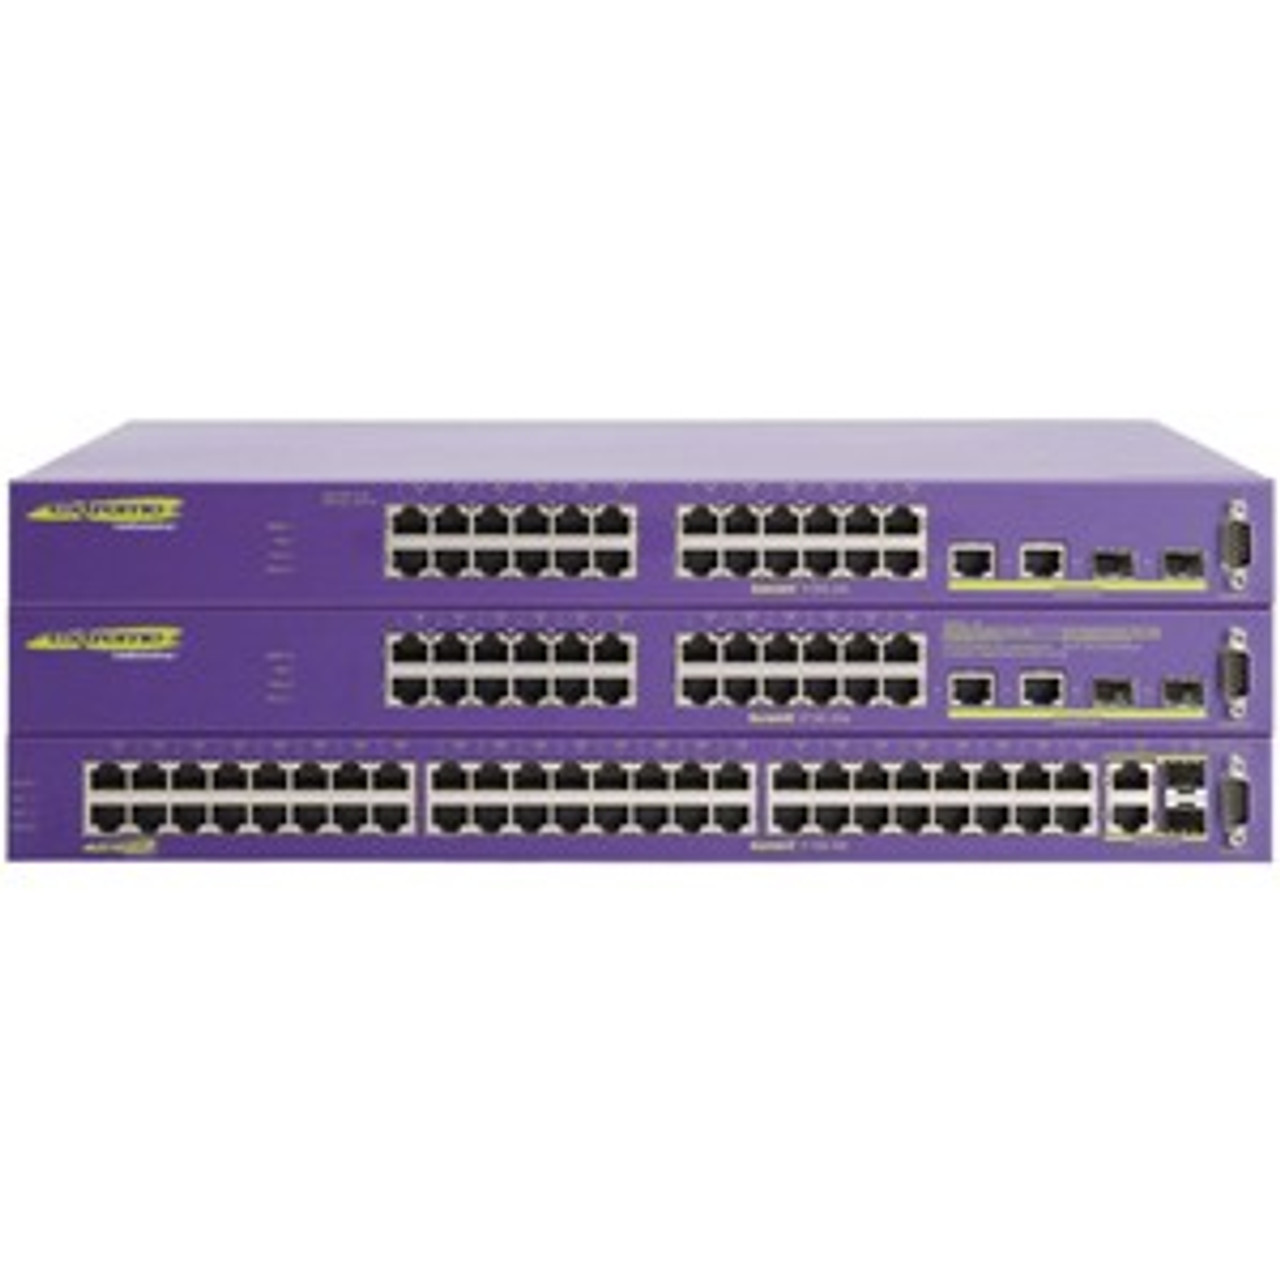 15205T Extreme Networks Summit X150-24p Fast Ethernet Switch TAA Compliant with PoE 4 x SFP (mini-GBIC) Shared 24 x 10/100Base-TX LAN 2 x 10/100/1000Base-